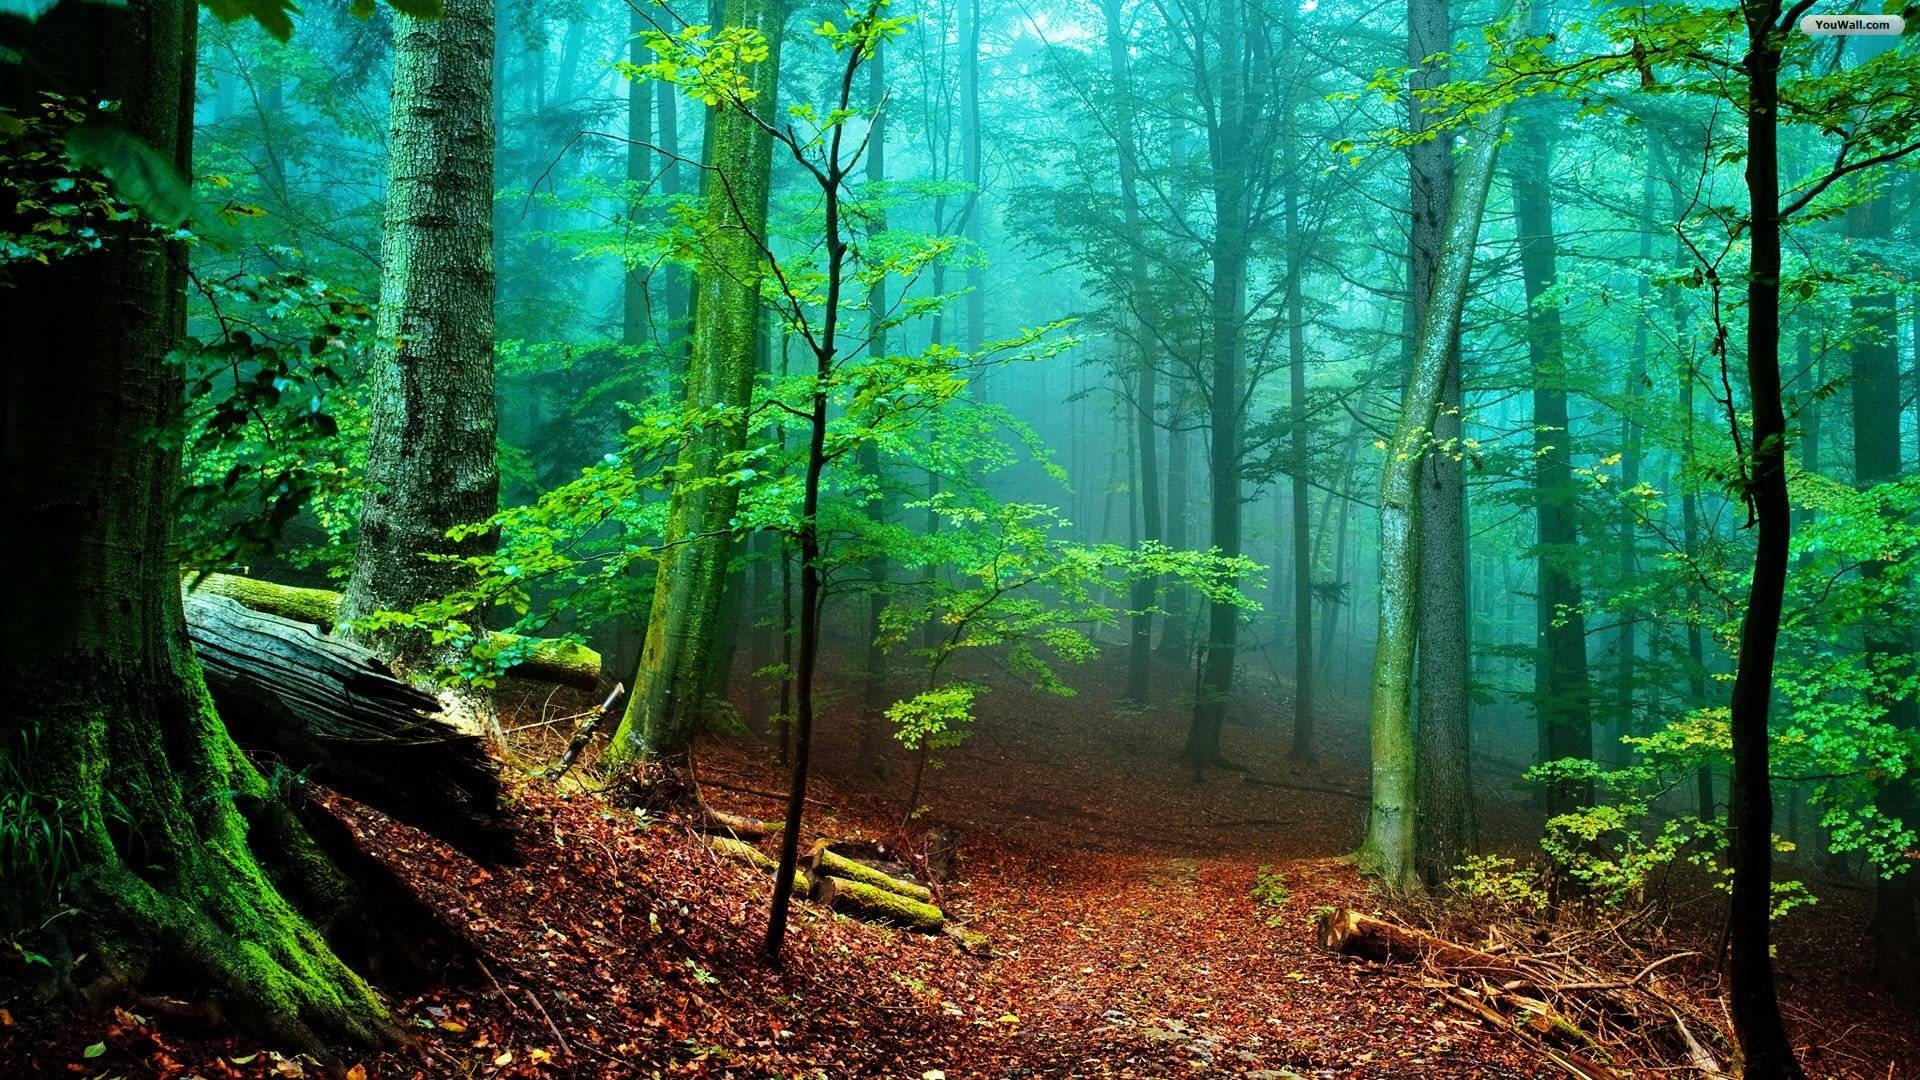 1920x1080 Hd Wallpapers Nature Forest Hd Images 3 HD Wallpapers | Hdimges.